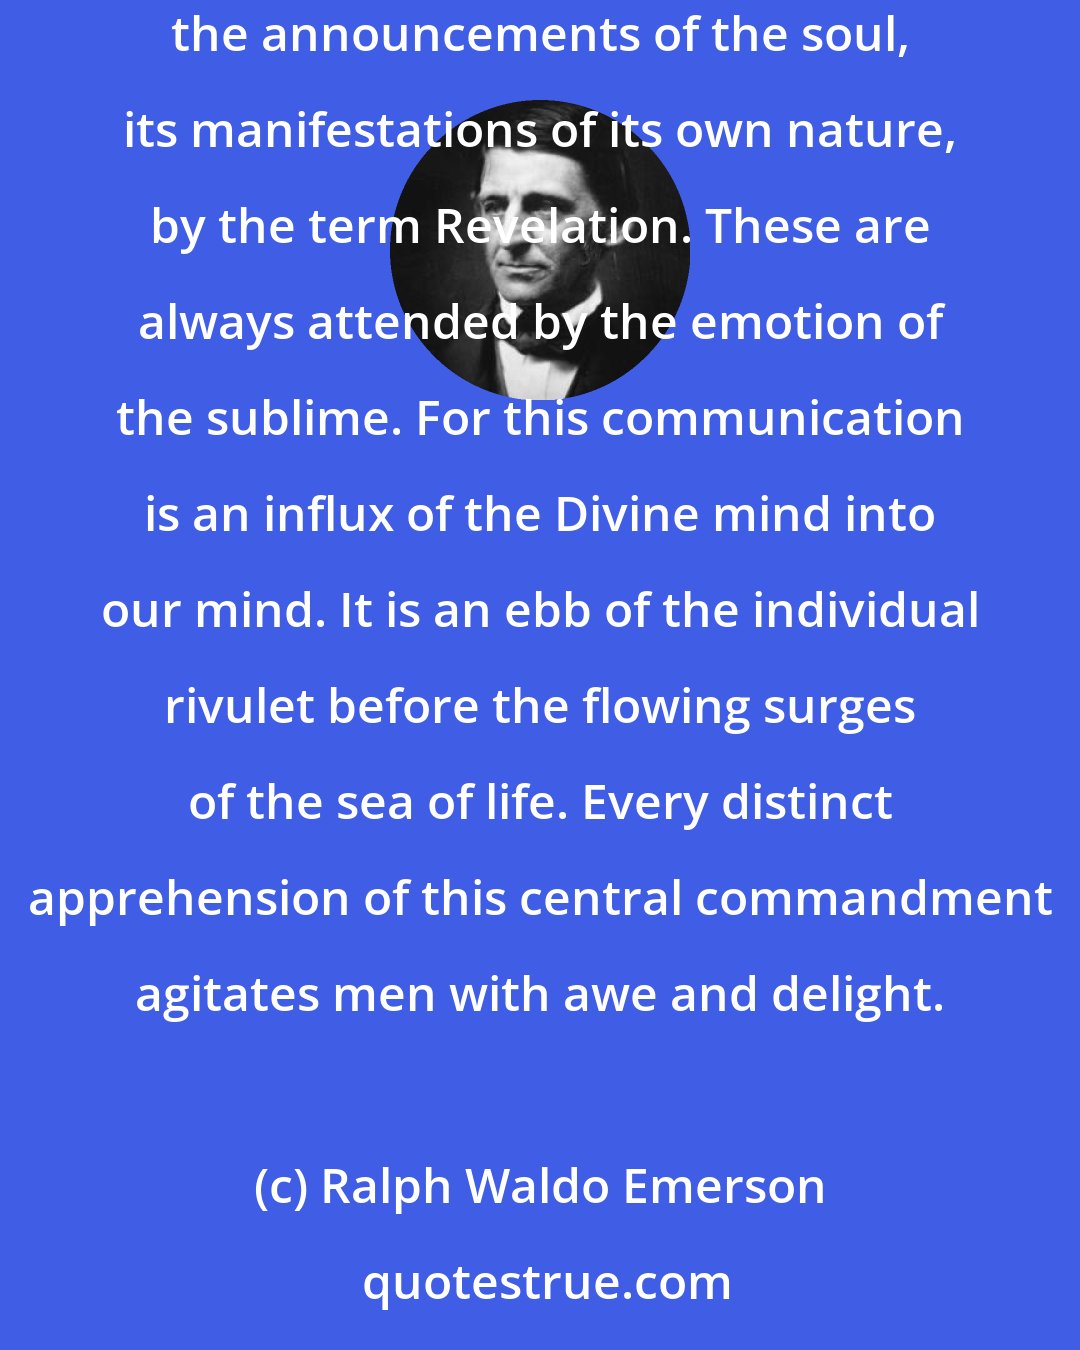 Ralph Waldo Emerson: The soul is the perceiver and revealer of truth. We know truth when we see it, let skeptic and scoffer say what they choose ... We distinguish the announcements of the soul, its manifestations of its own nature, by the term Revelation. These are always attended by the emotion of the sublime. For this communication is an influx of the Divine mind into our mind. It is an ebb of the individual rivulet before the flowing surges of the sea of life. Every distinct apprehension of this central commandment agitates men with awe and delight.